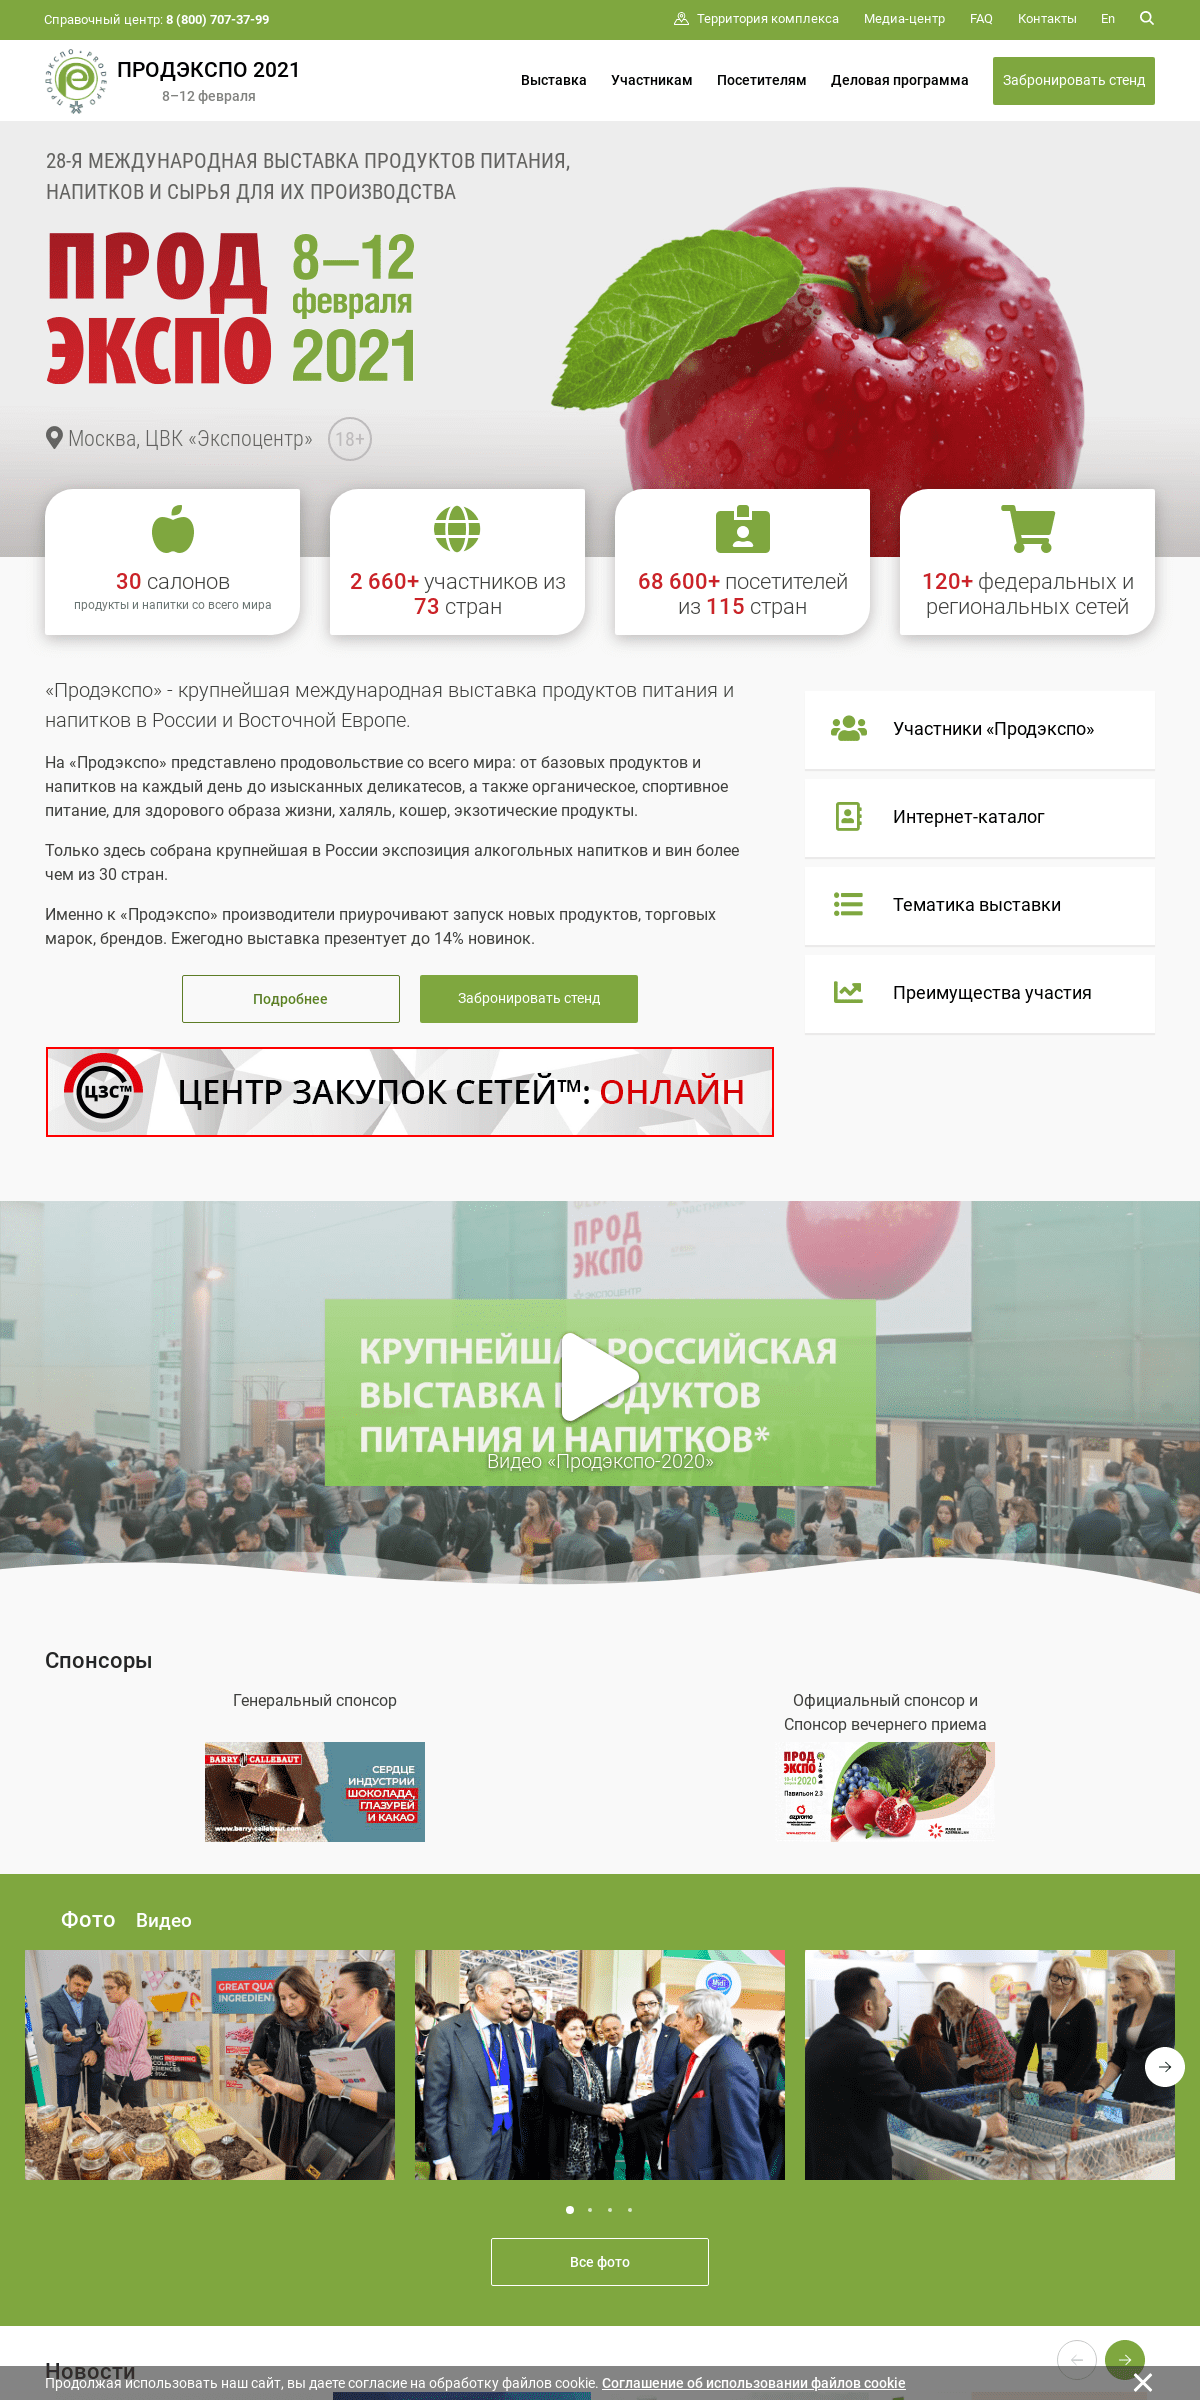 A complete backup of prod-expo.ru